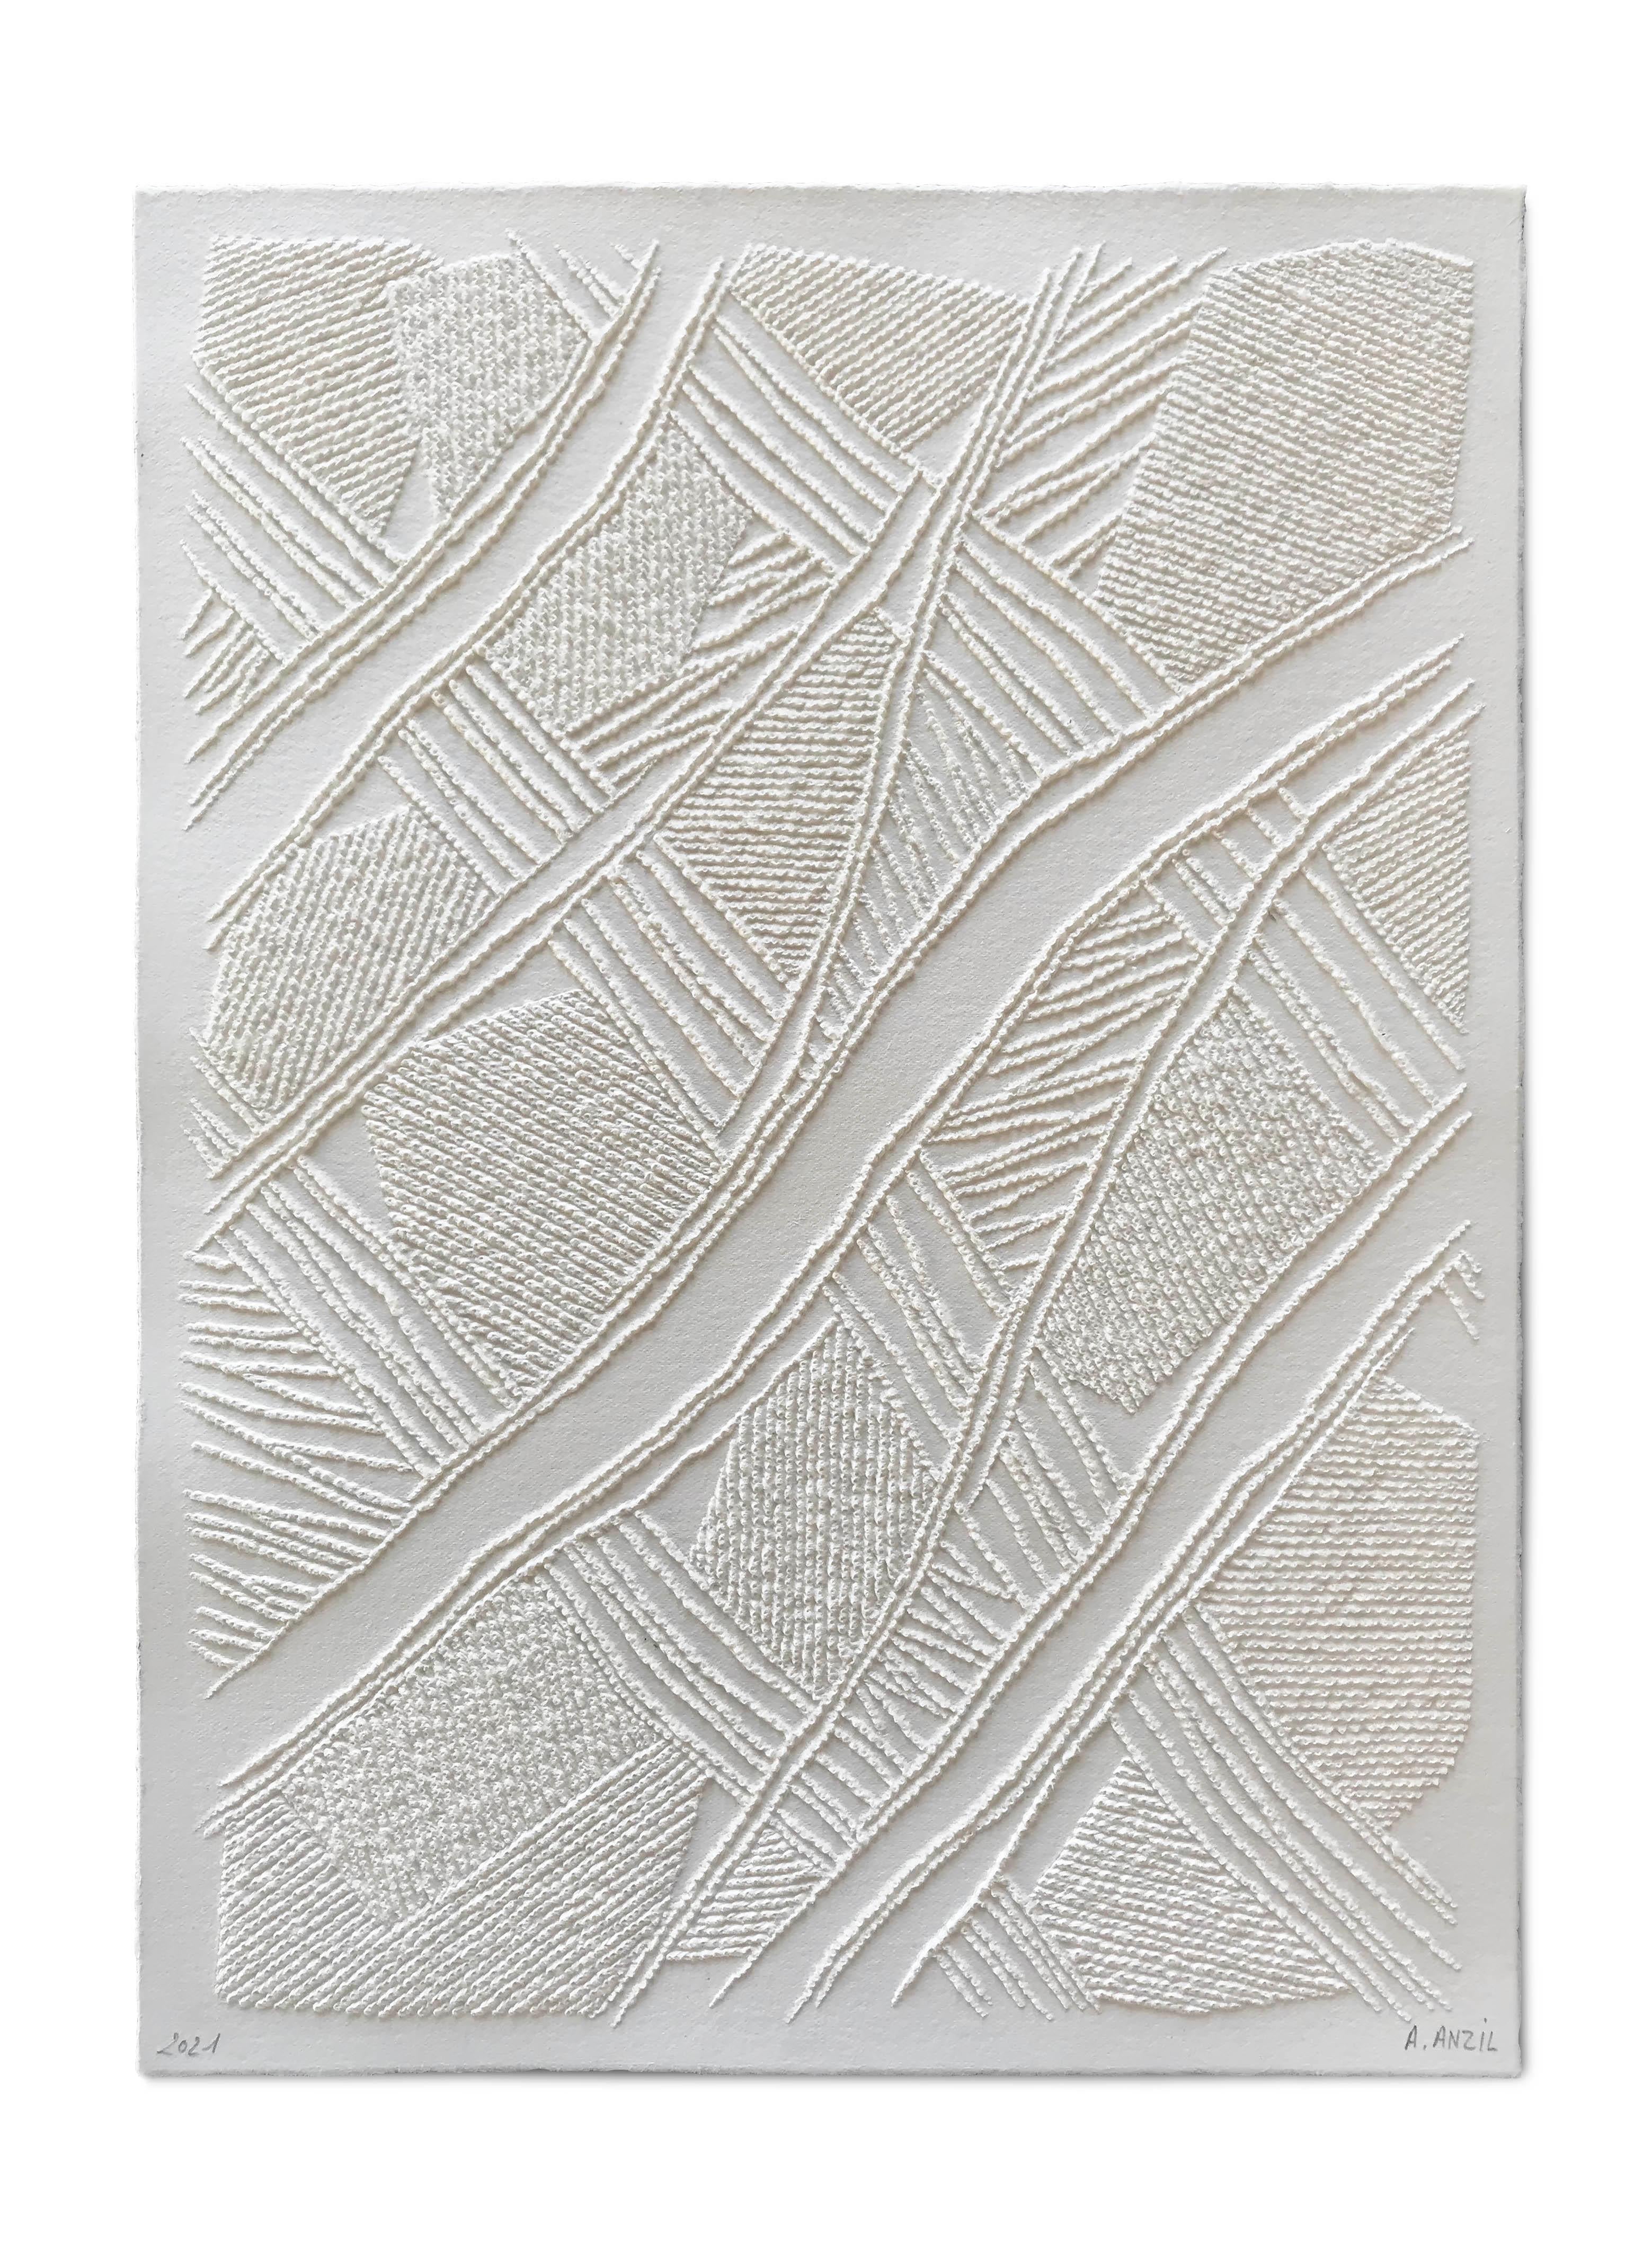 Antonin Anzil Abstract Sculpture - Subak - intricate white 3D abstract landscape drawing with pulled paper fiber